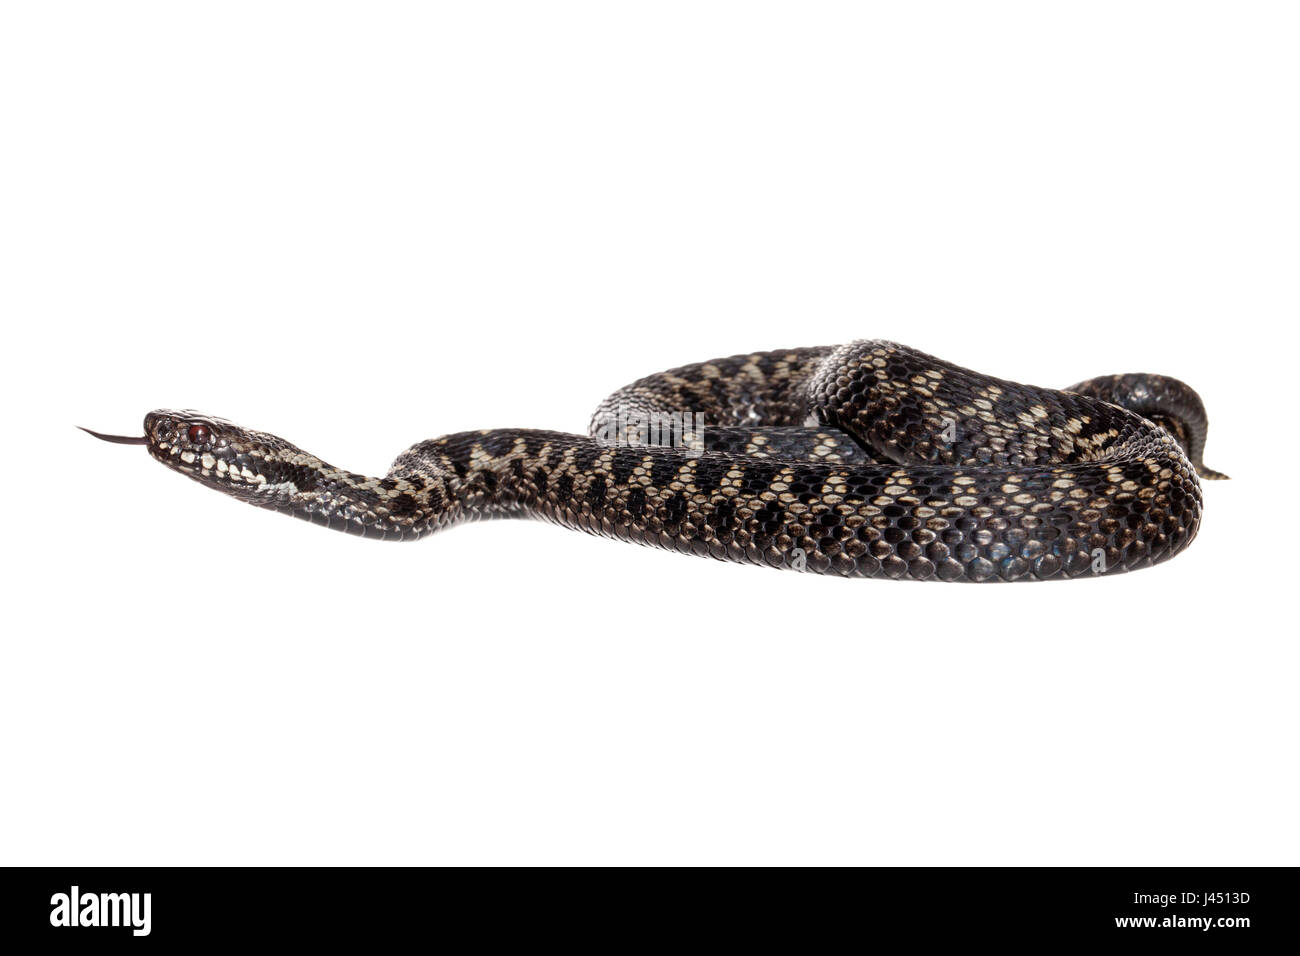 photo of a male common viper against a white background Stock Photo